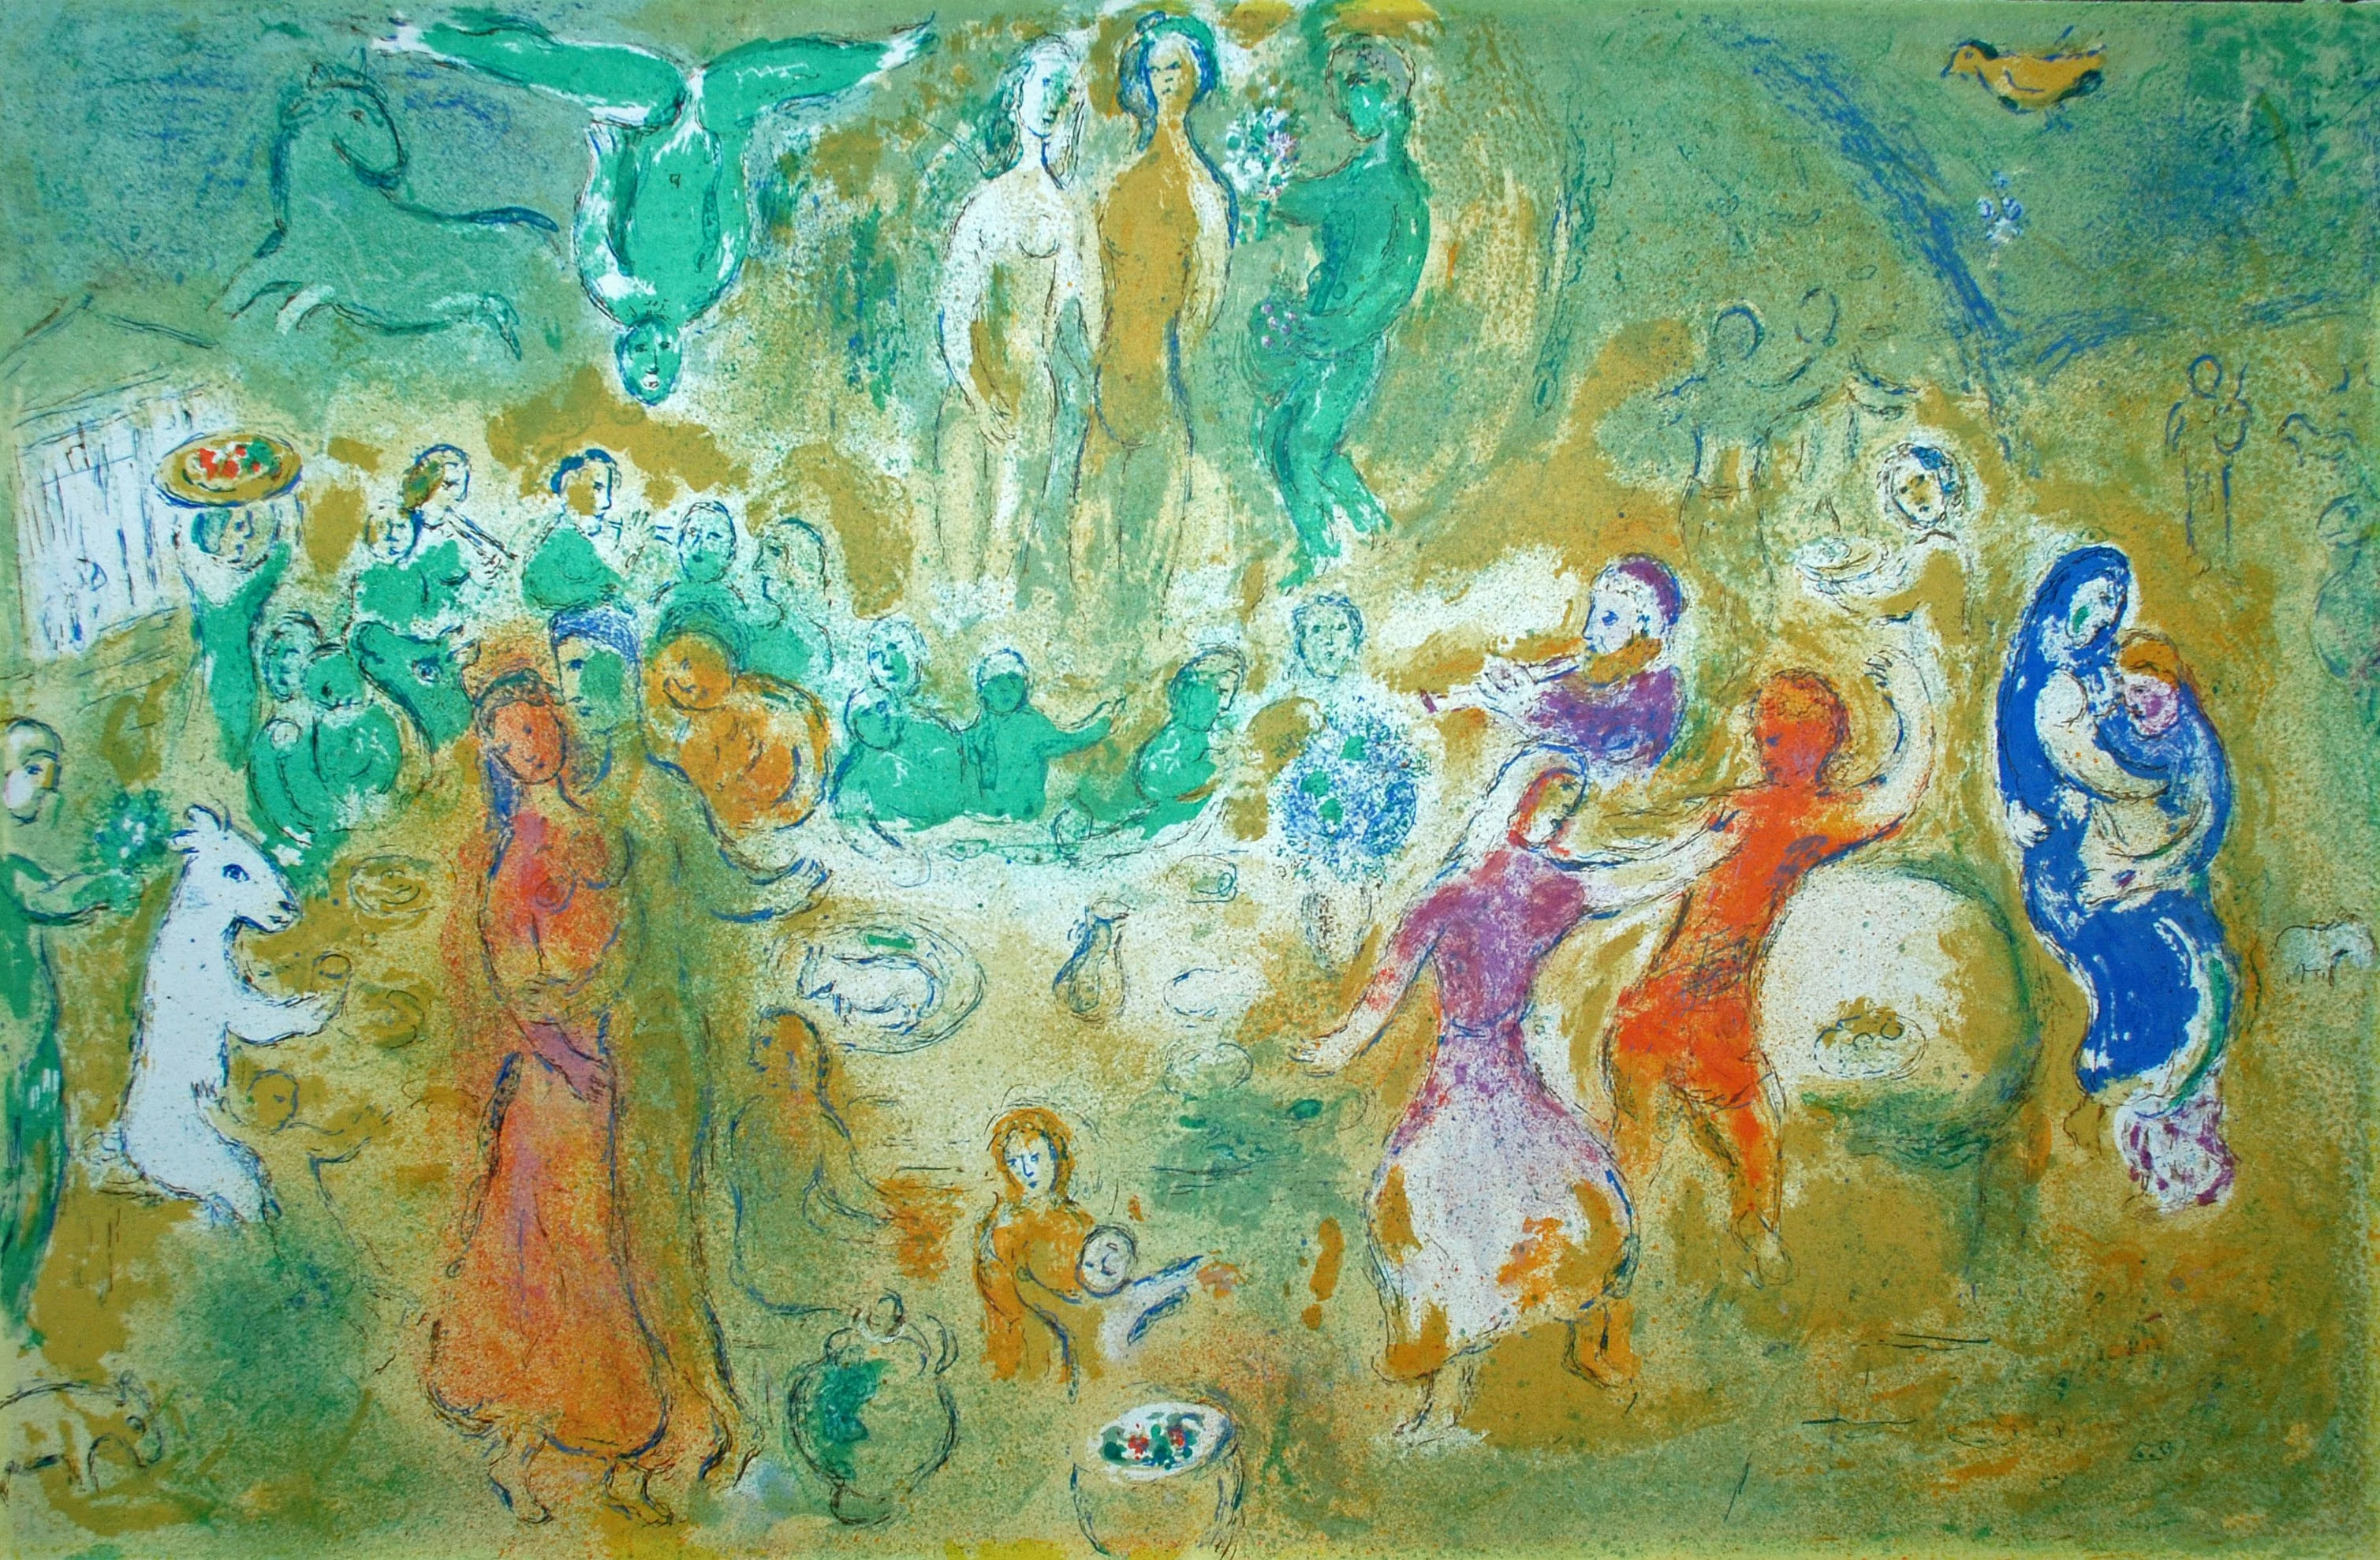 Wedding Feast in the Nymphs Grotto, Marc Chagall